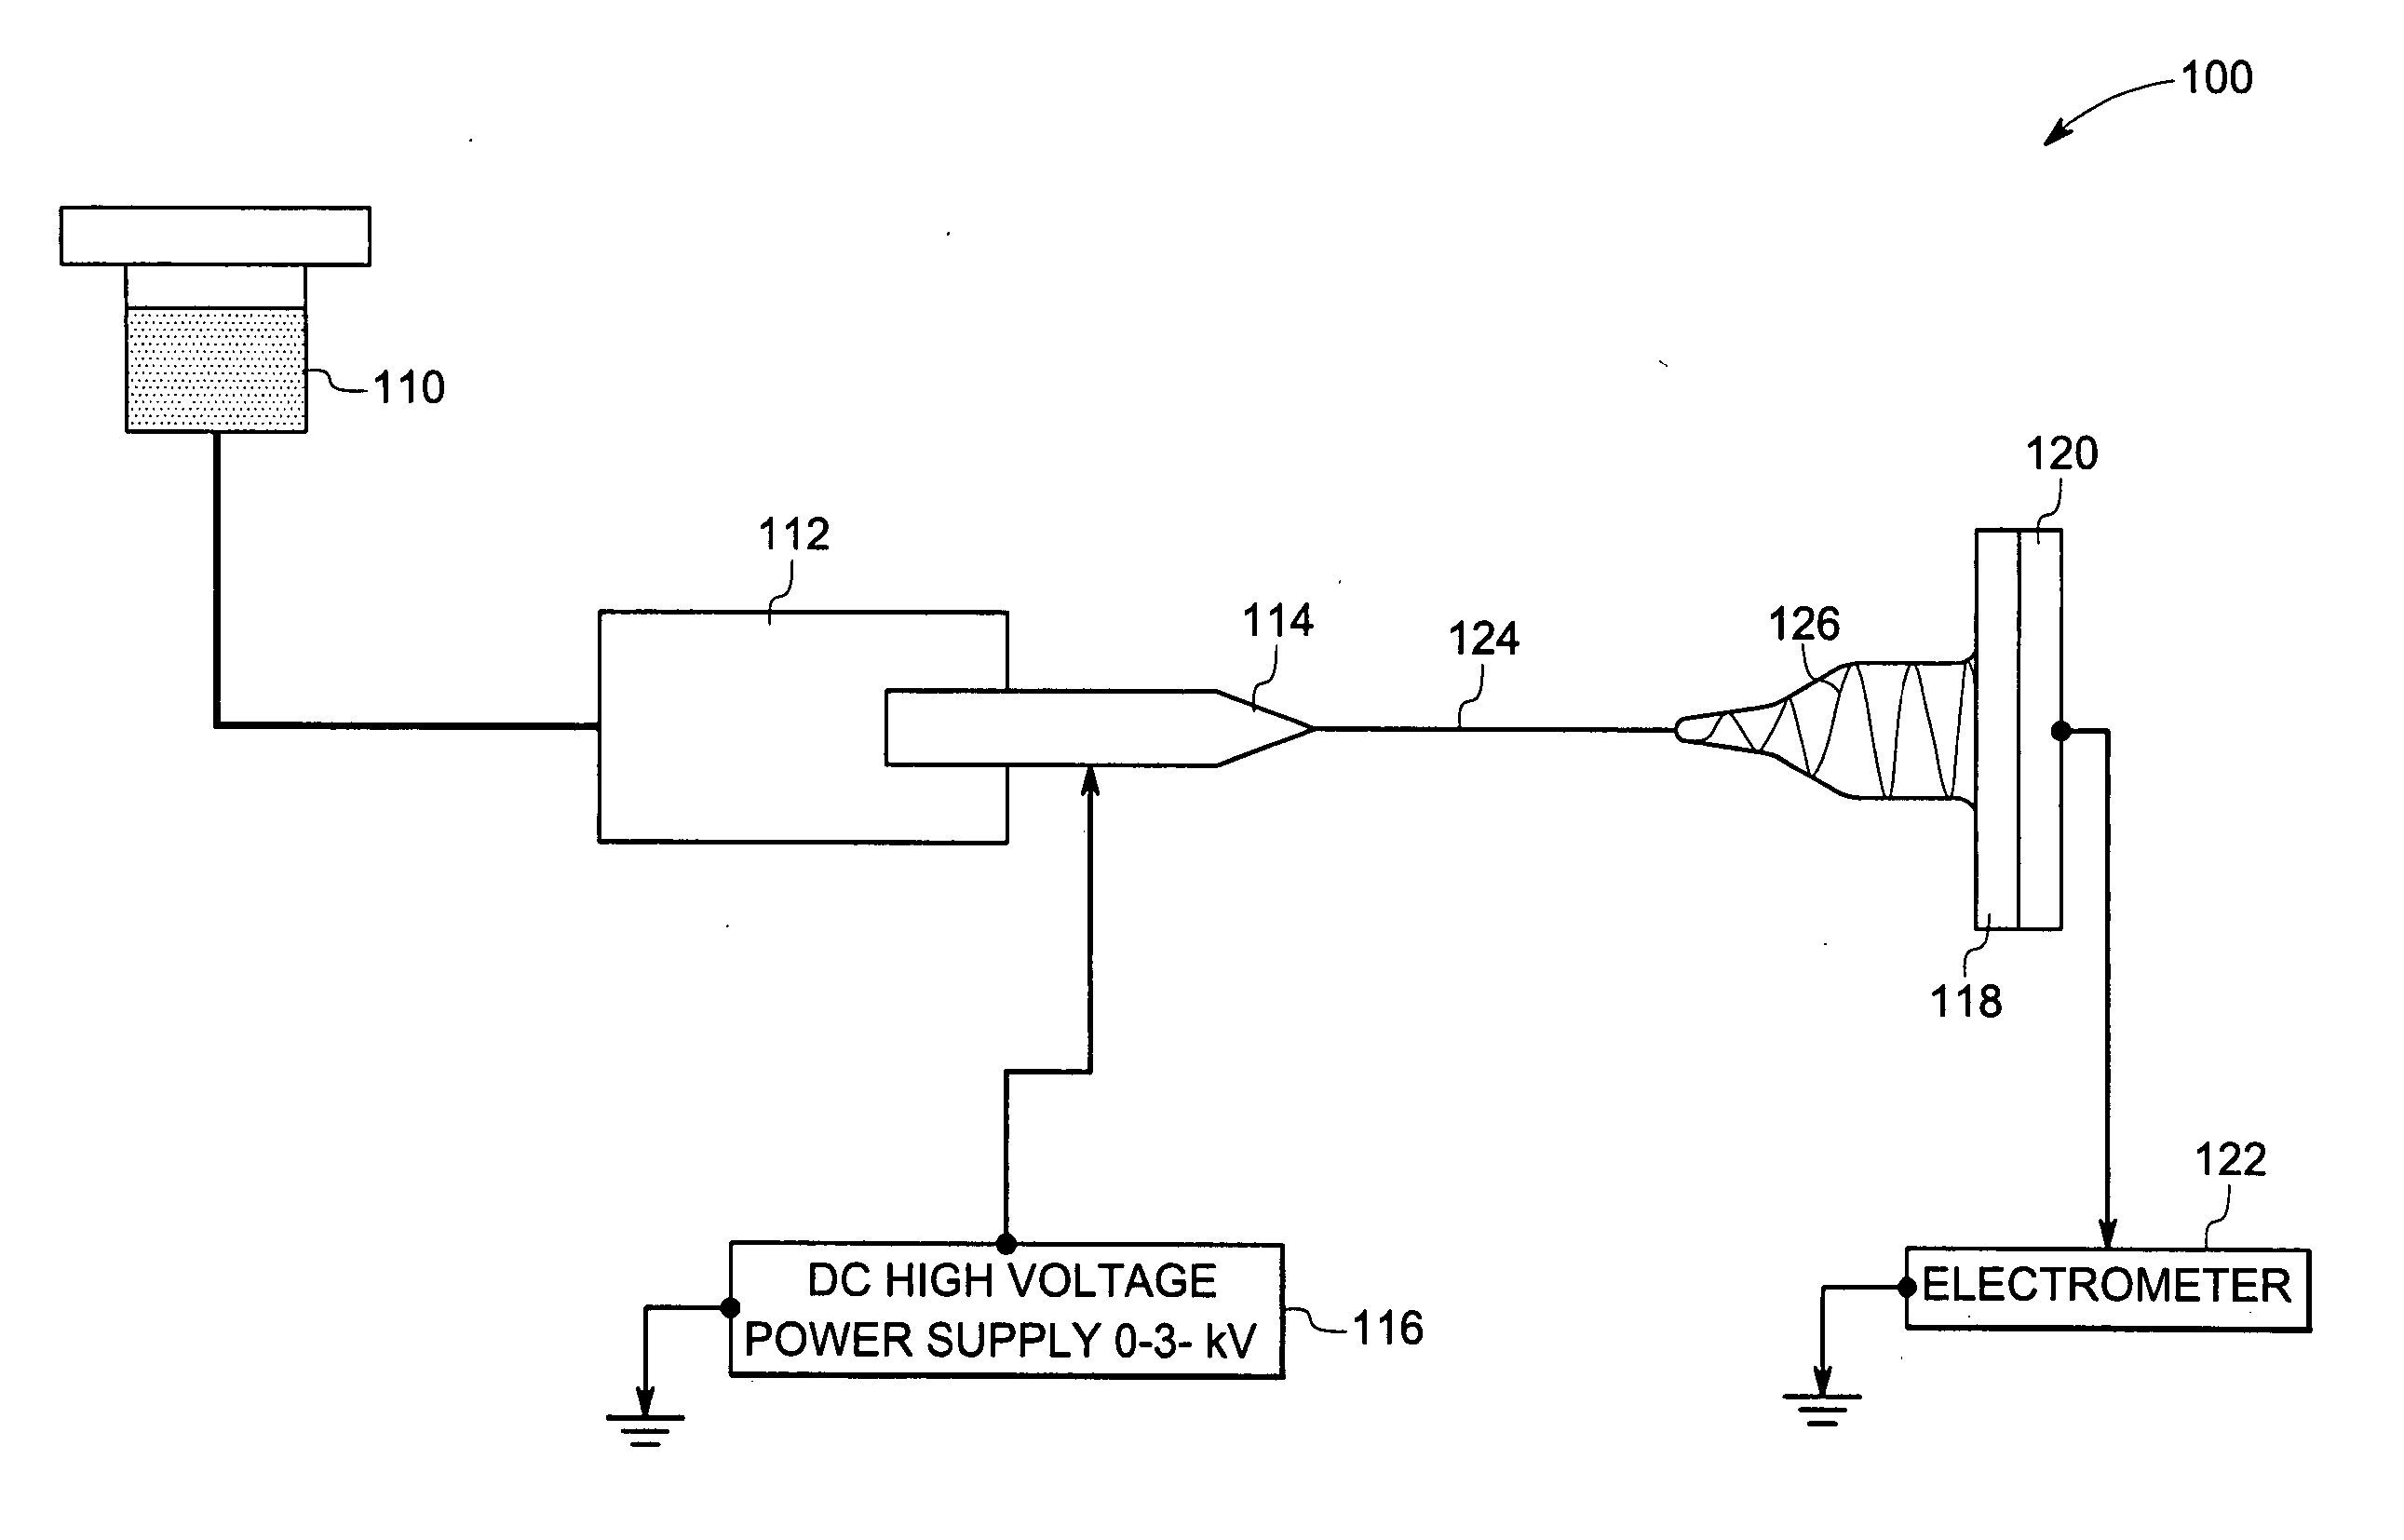 Molecular structures for gas sensing and devices and methods therewith